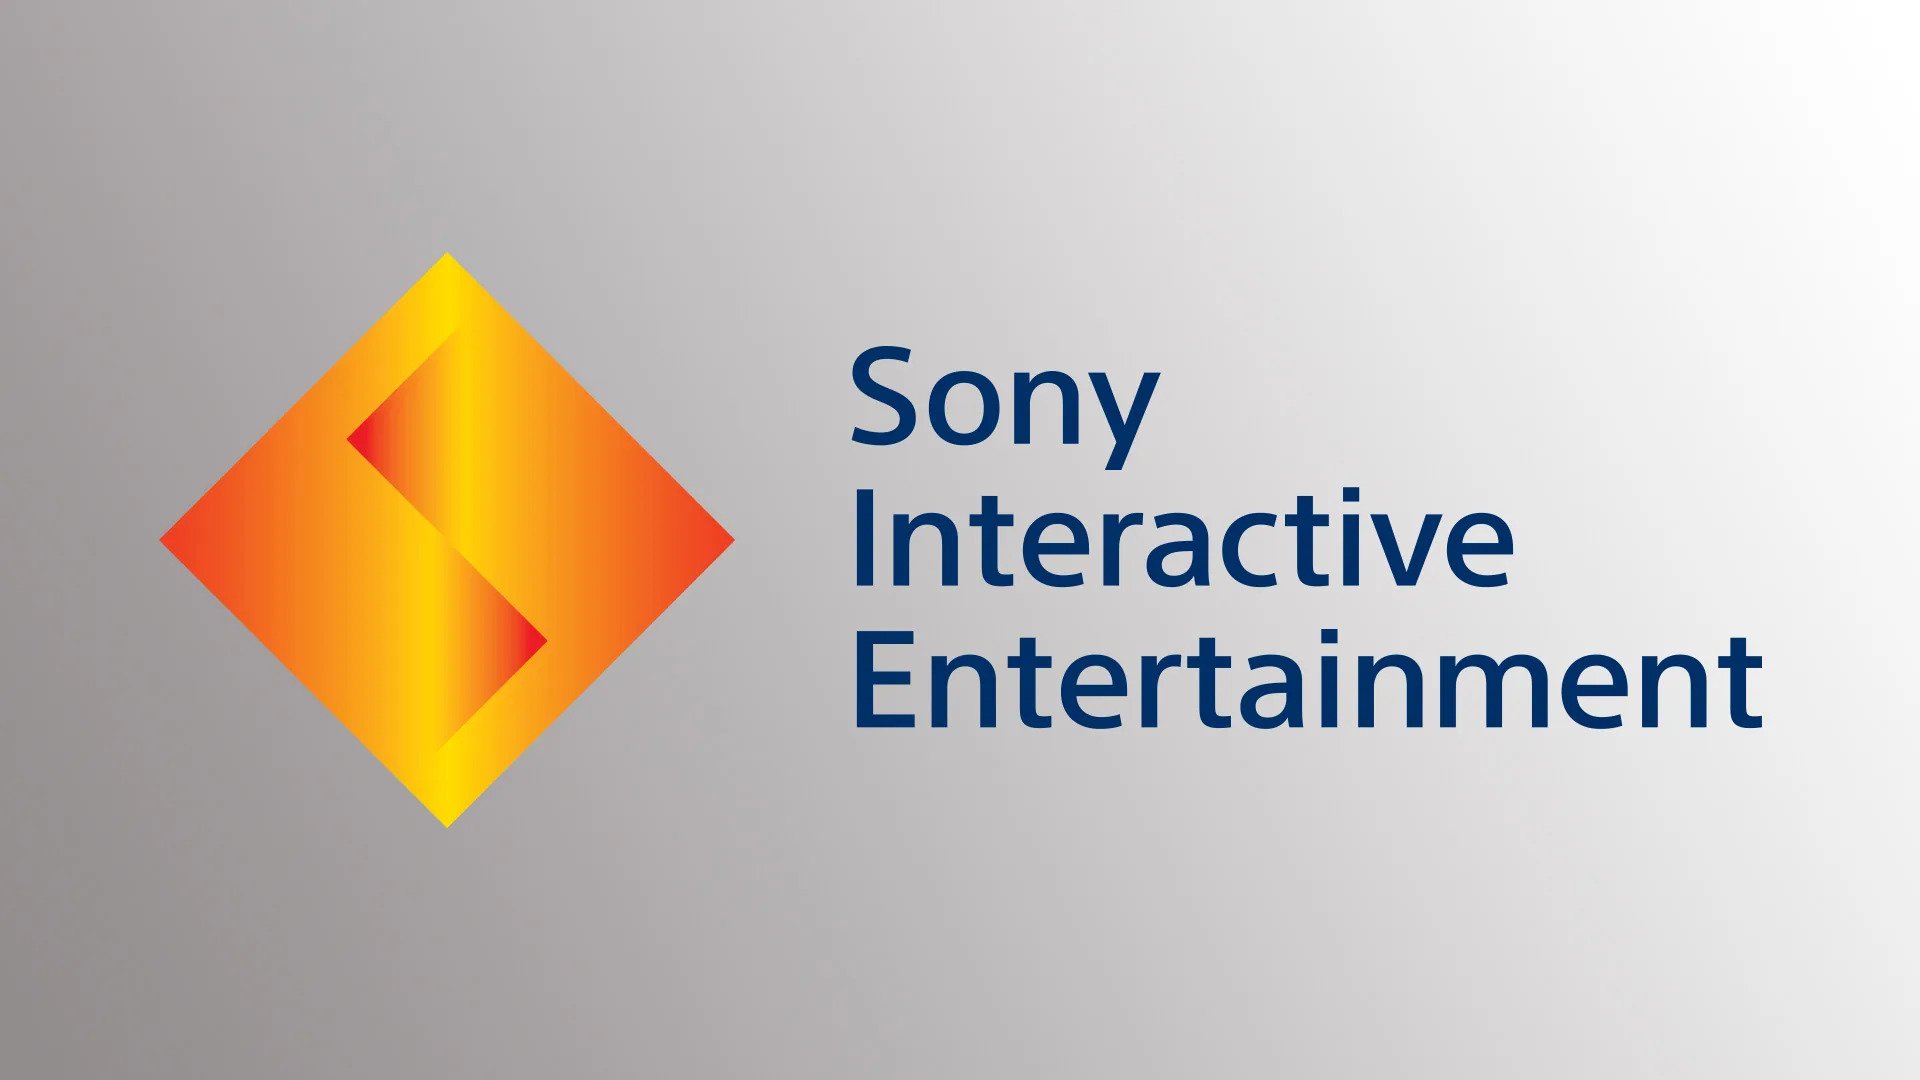 Sony Interactive Entertainment || Image Source: PlayStation.